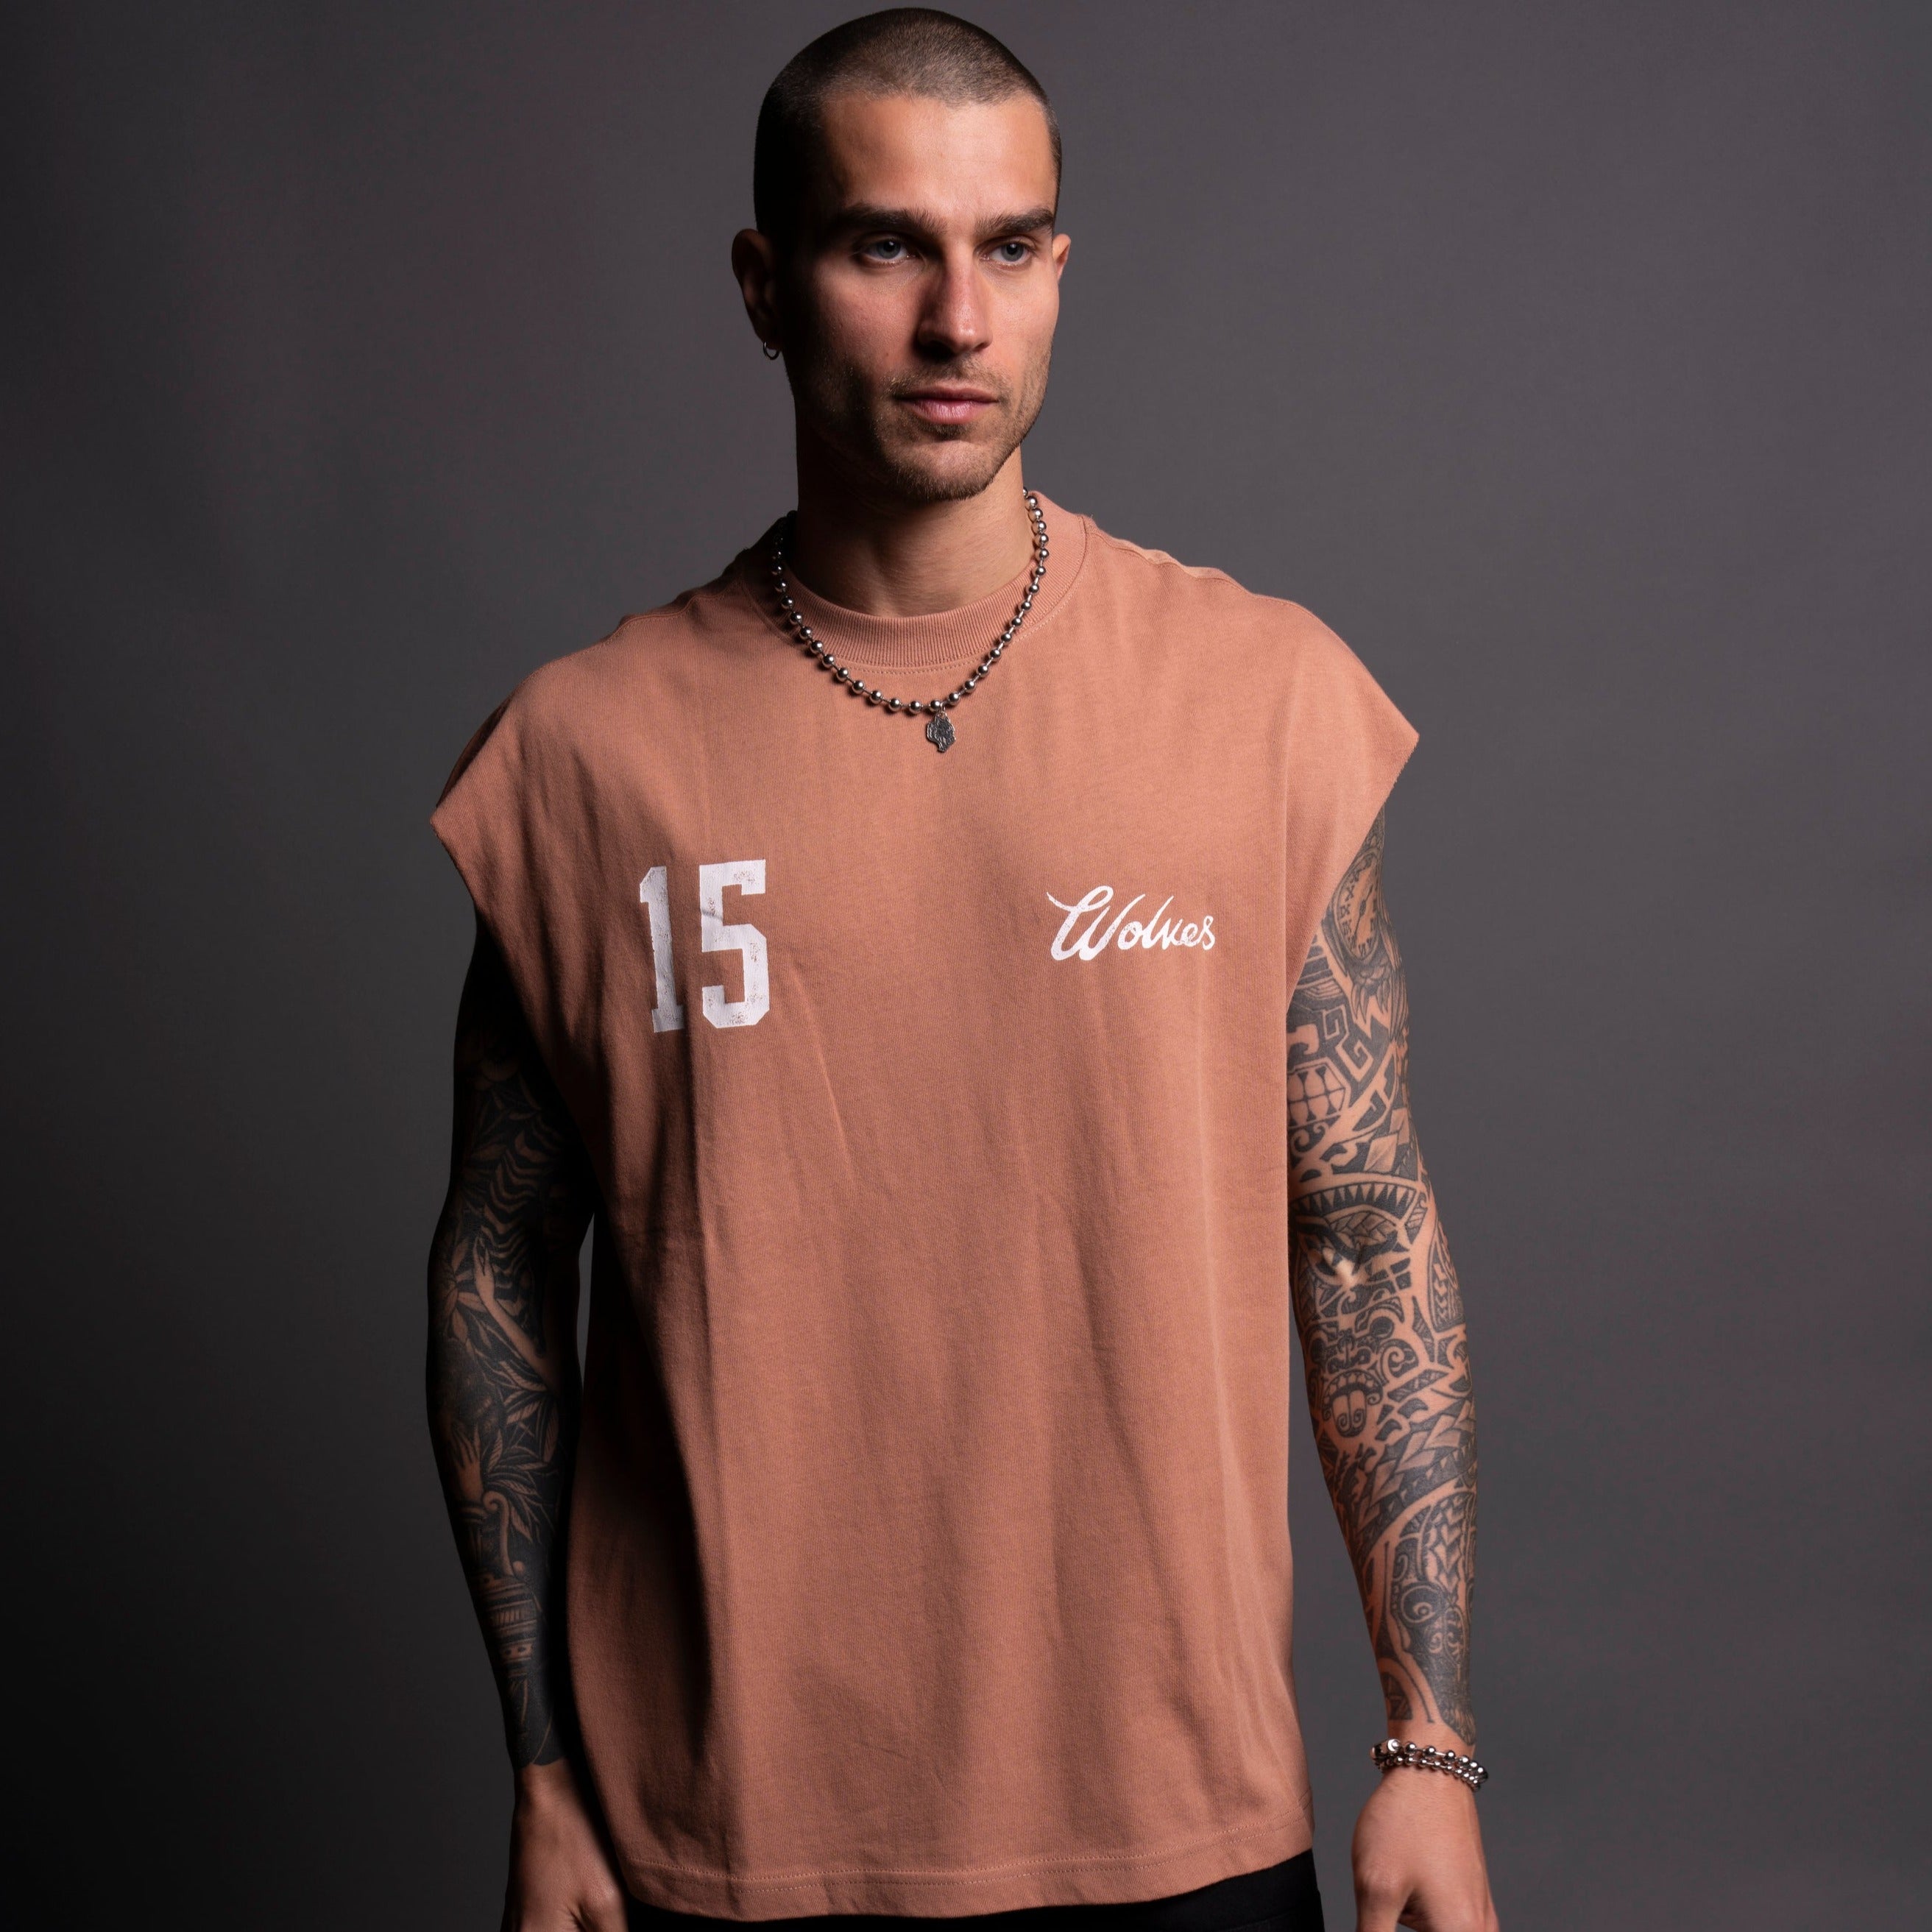 Our Wolf "Premium Vintage" Muscle Tee in Desert Rose